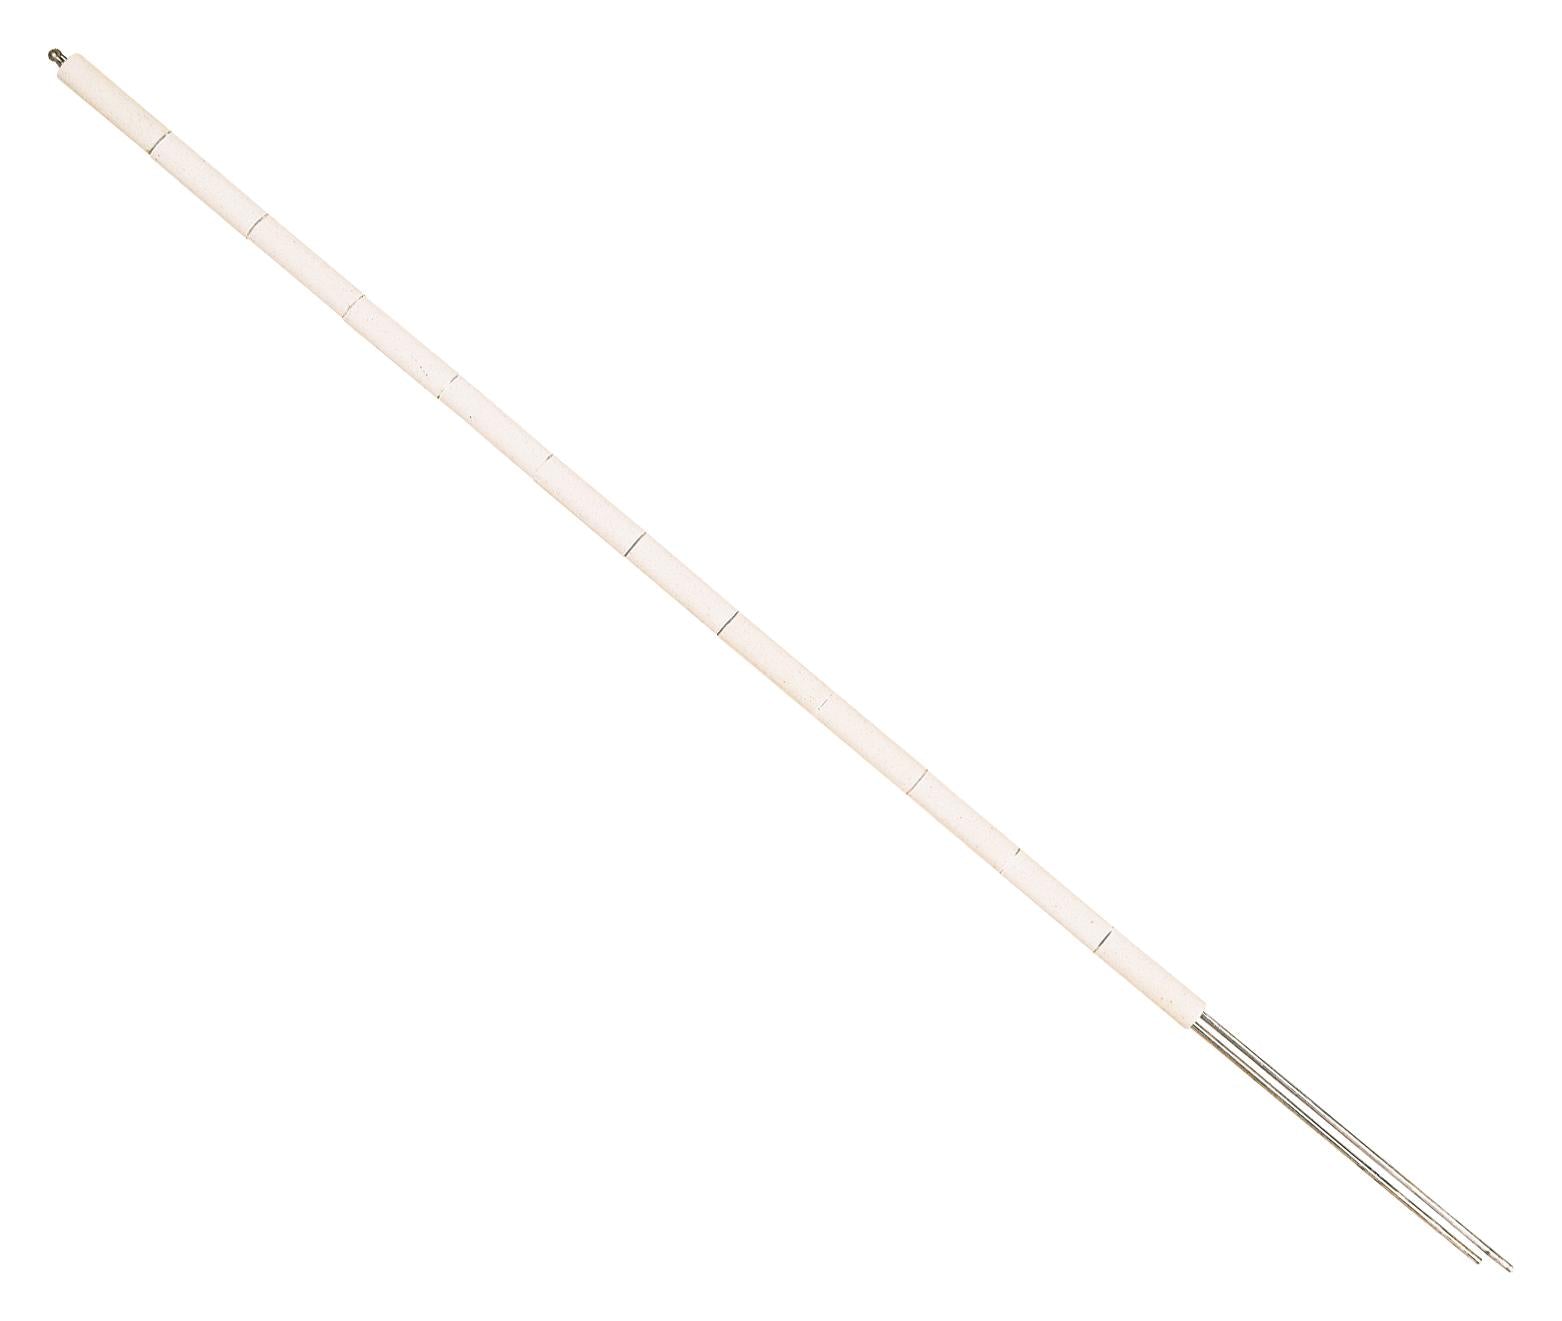 DH-1-24-K-12 THERMOCOUPLE, TYPE K, 300MM OMEGA